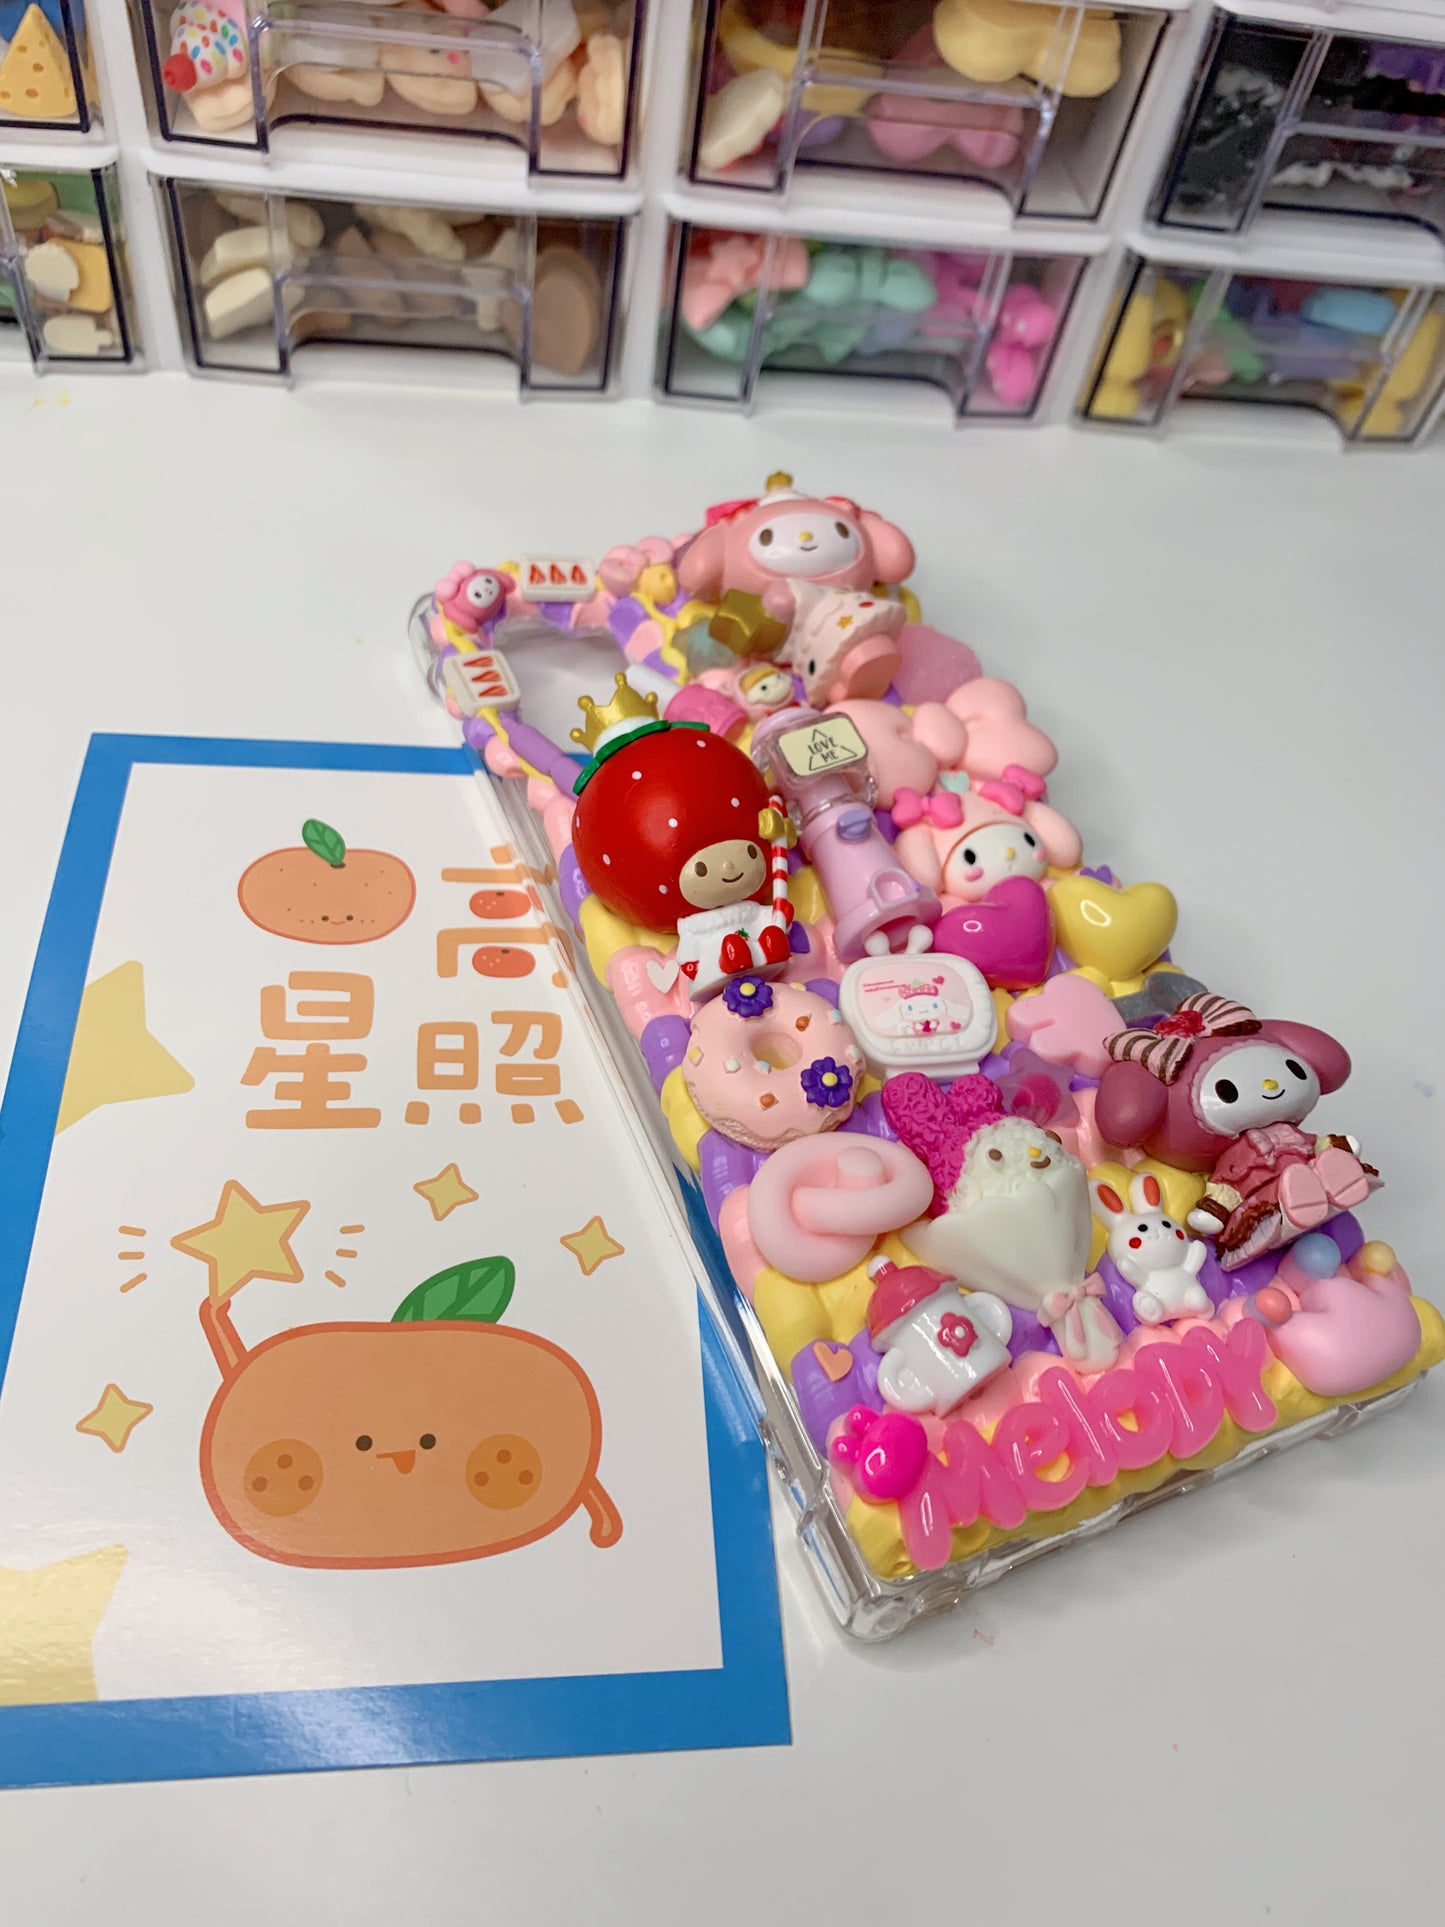 Sanrio Kuromi MyMelody Whipped cream phone cases,cute phone case, diycases, custommade case,3D Anime Phone cover, Kawaii Whip Cream Case,Melody Phone accessories